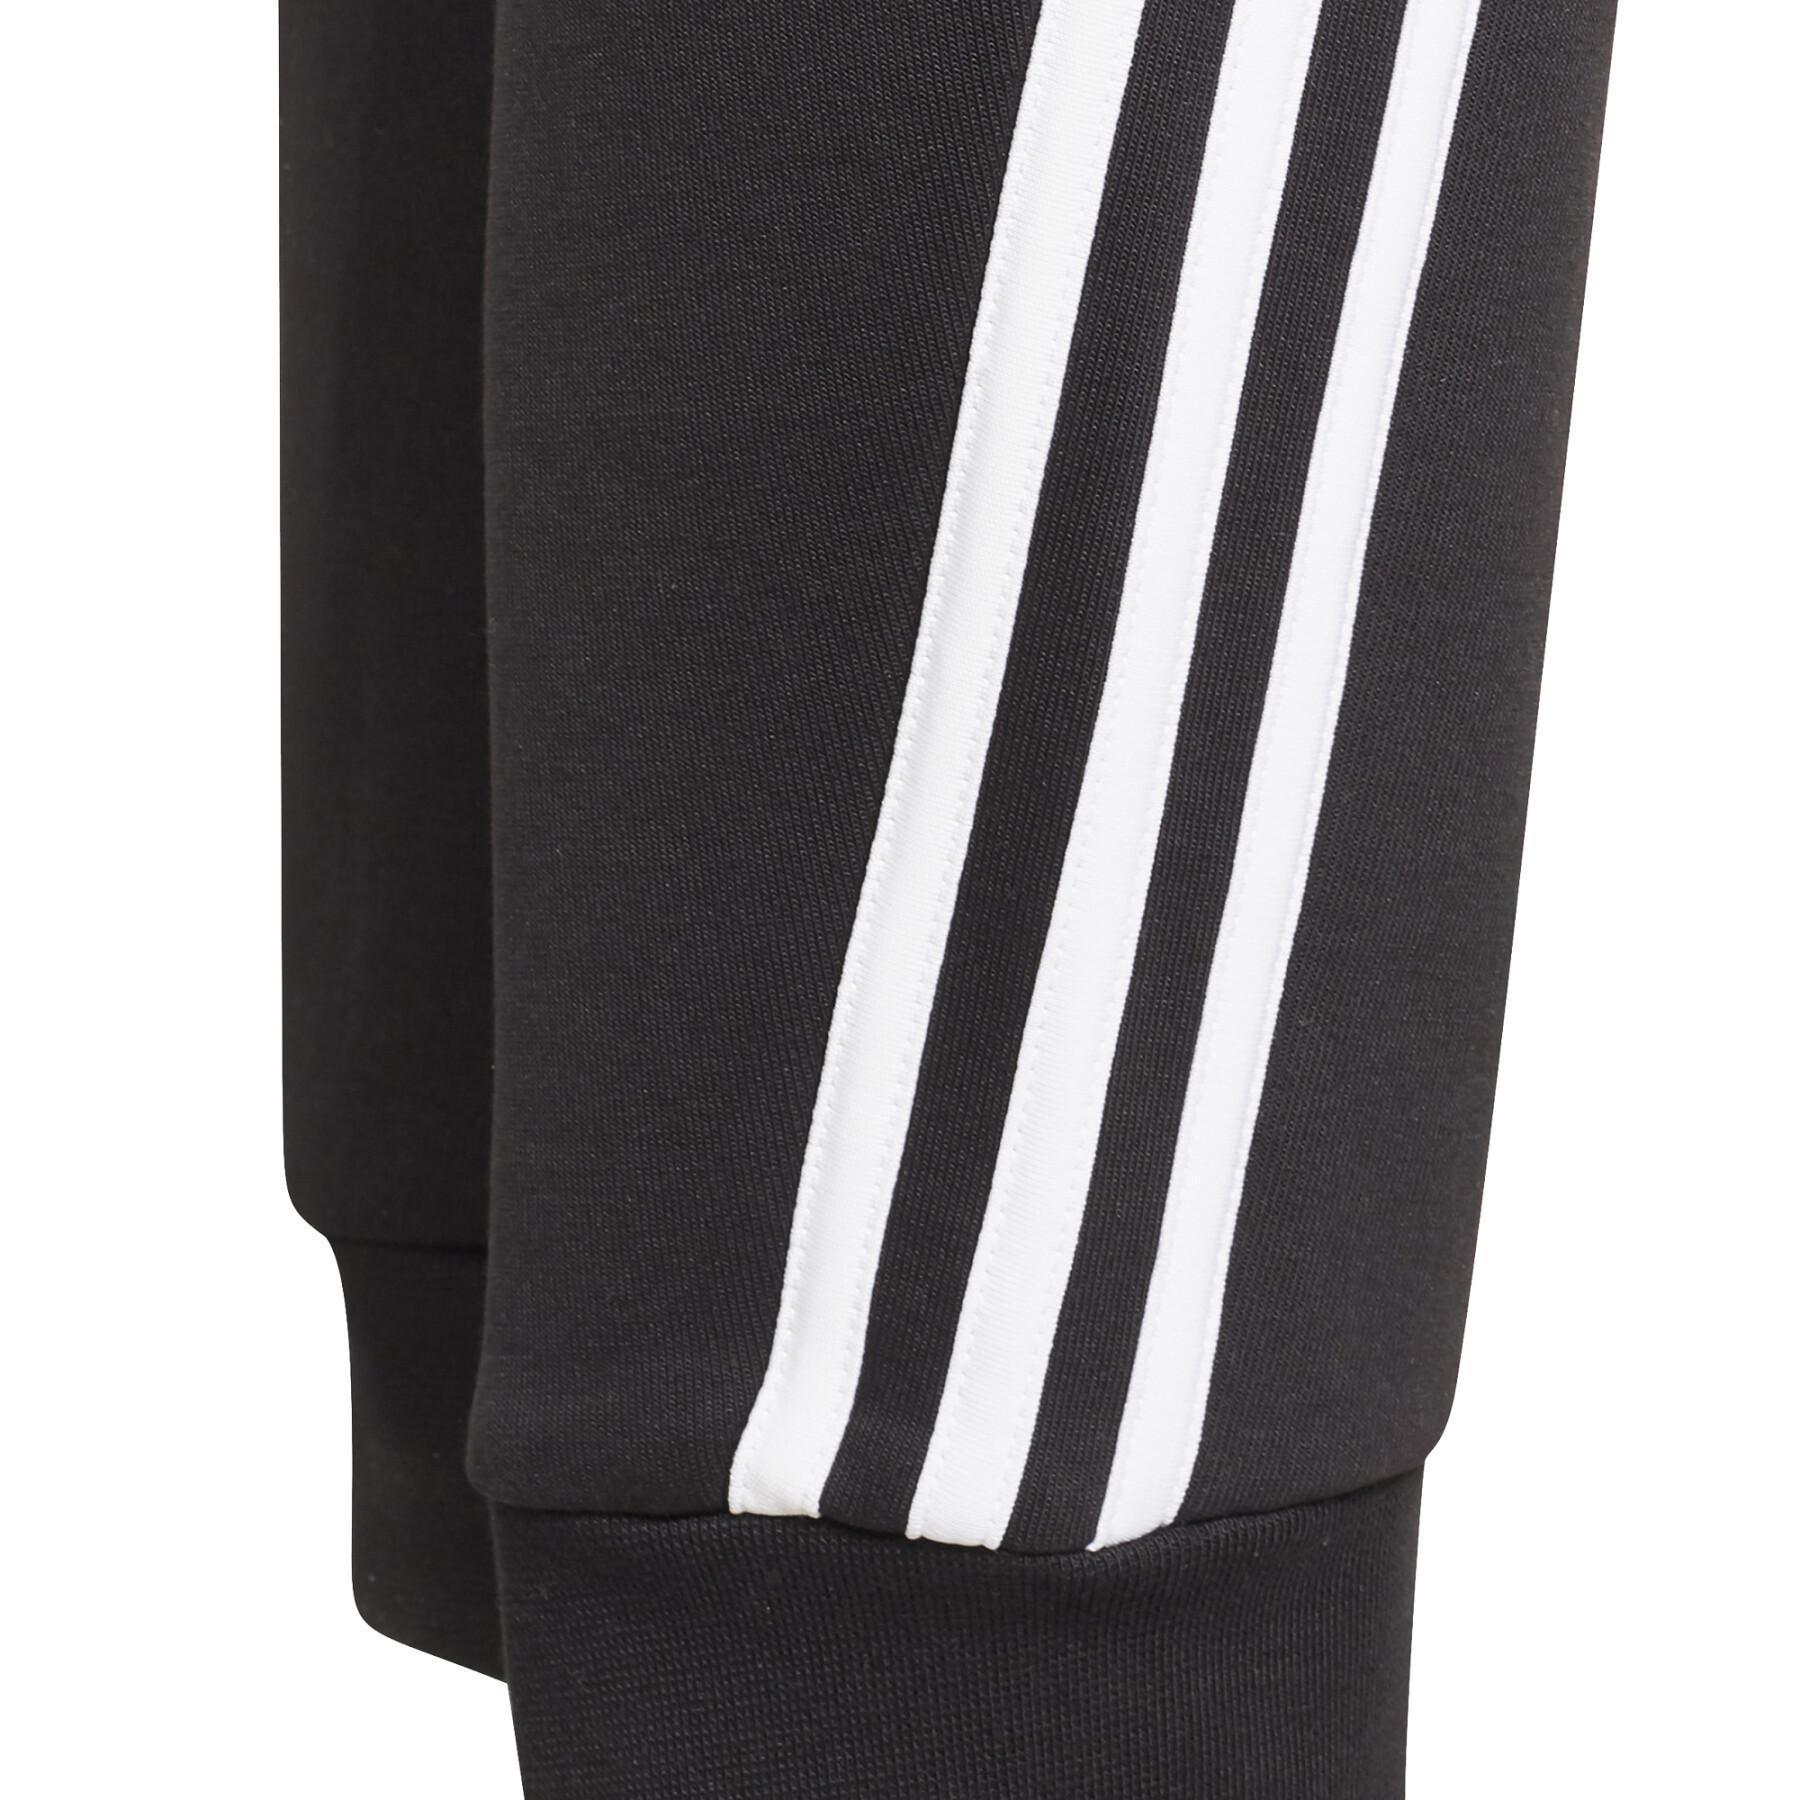 Children's trousers adidas Future Icons Tapered-Leg